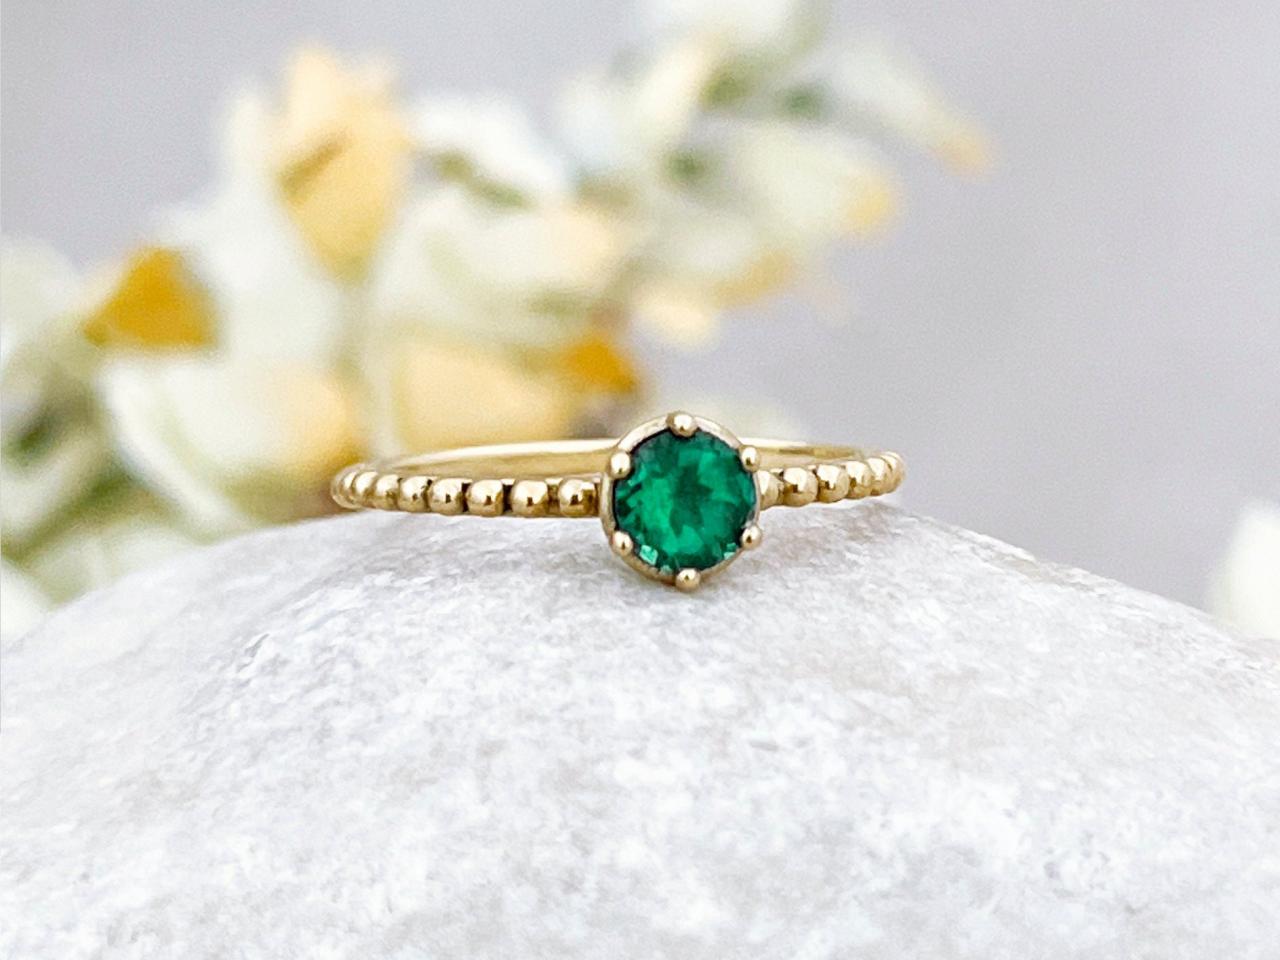 Natural emerald gold statement solitaire ring, Green gemstone delicate engagement ring, 18k stacking ring for bride gift